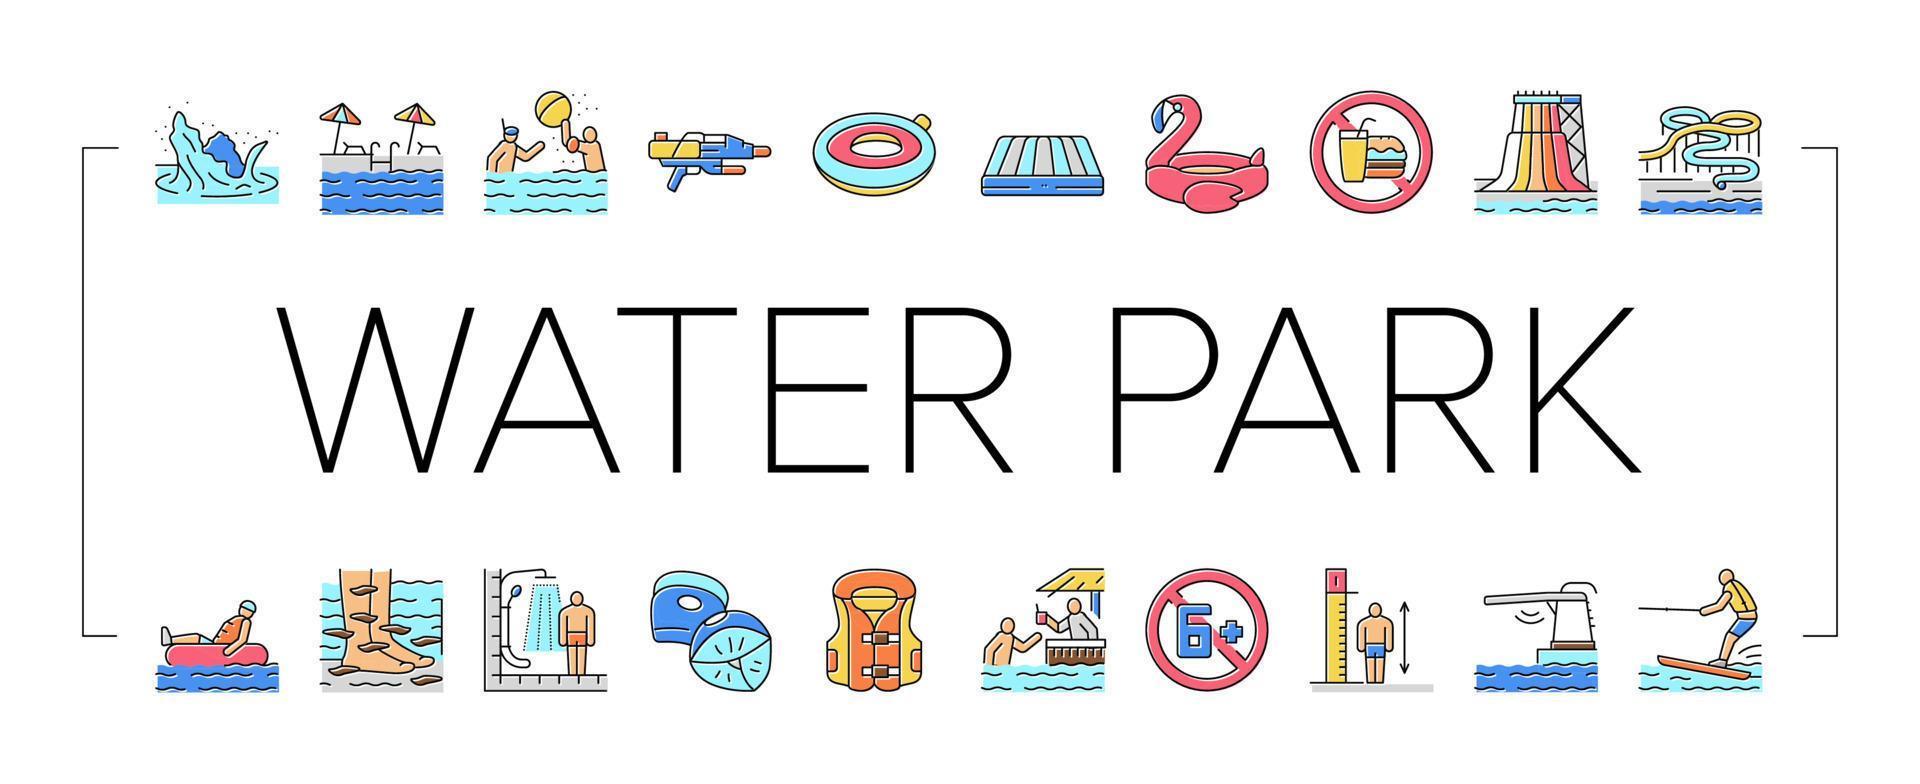 Water Park Attraction And Pool Icons Set Vector